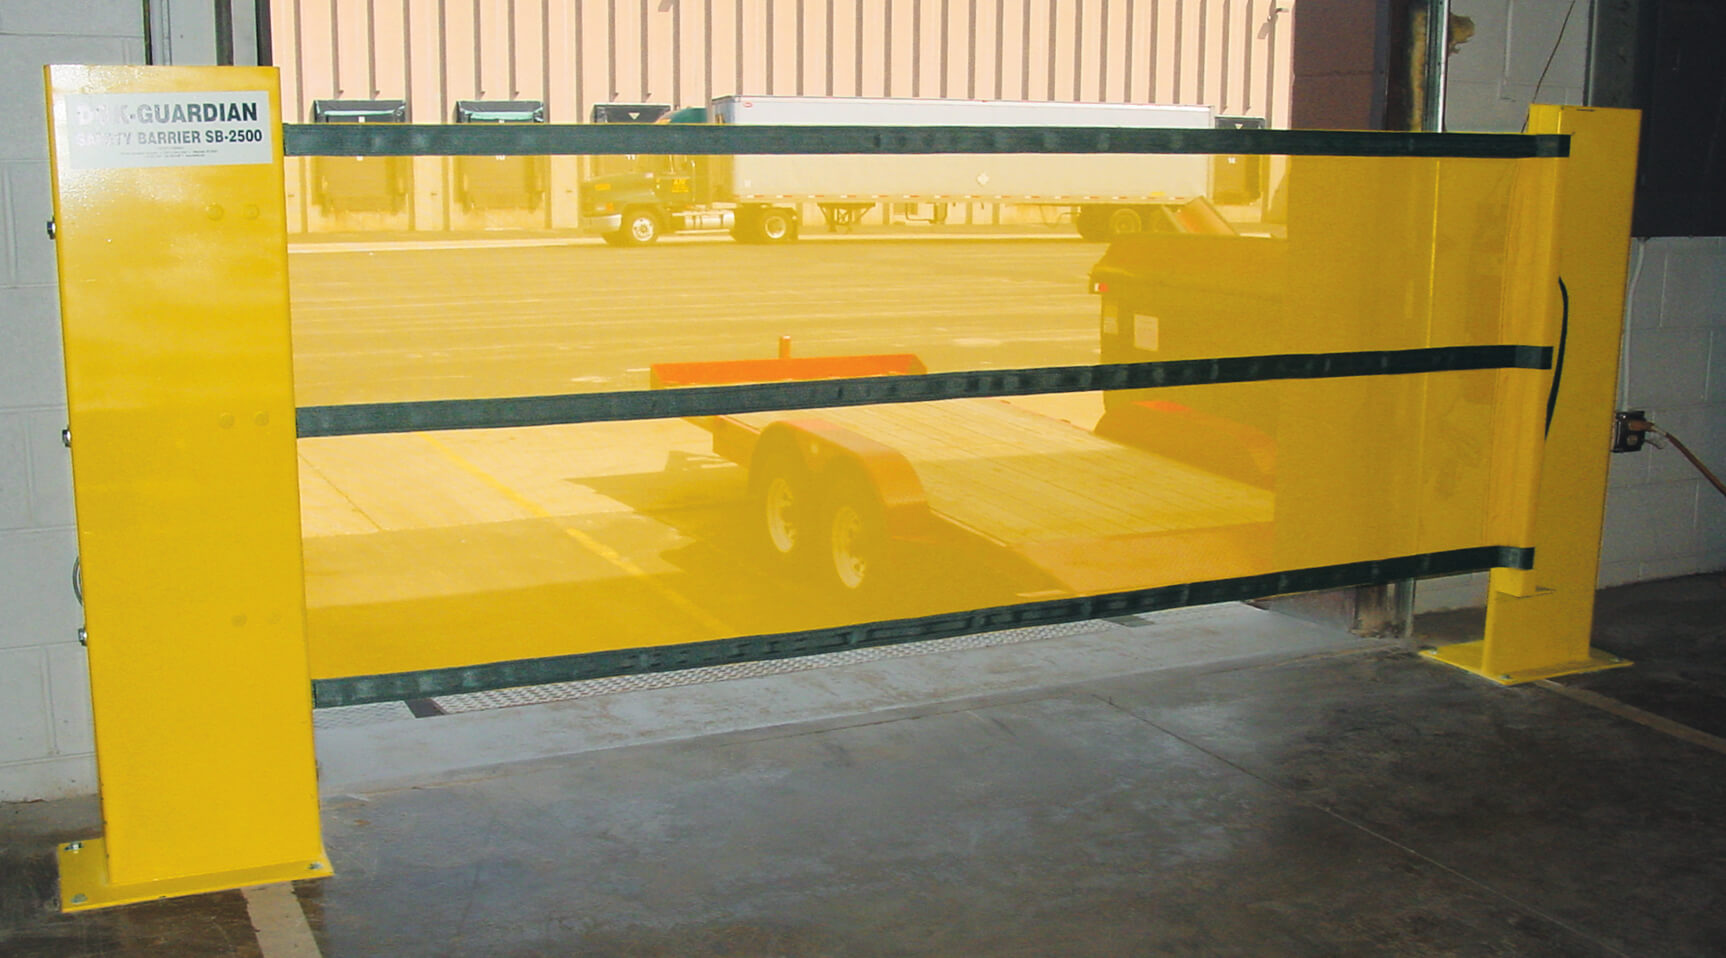 Loading Dock Safety Barriers | Rite-Hite